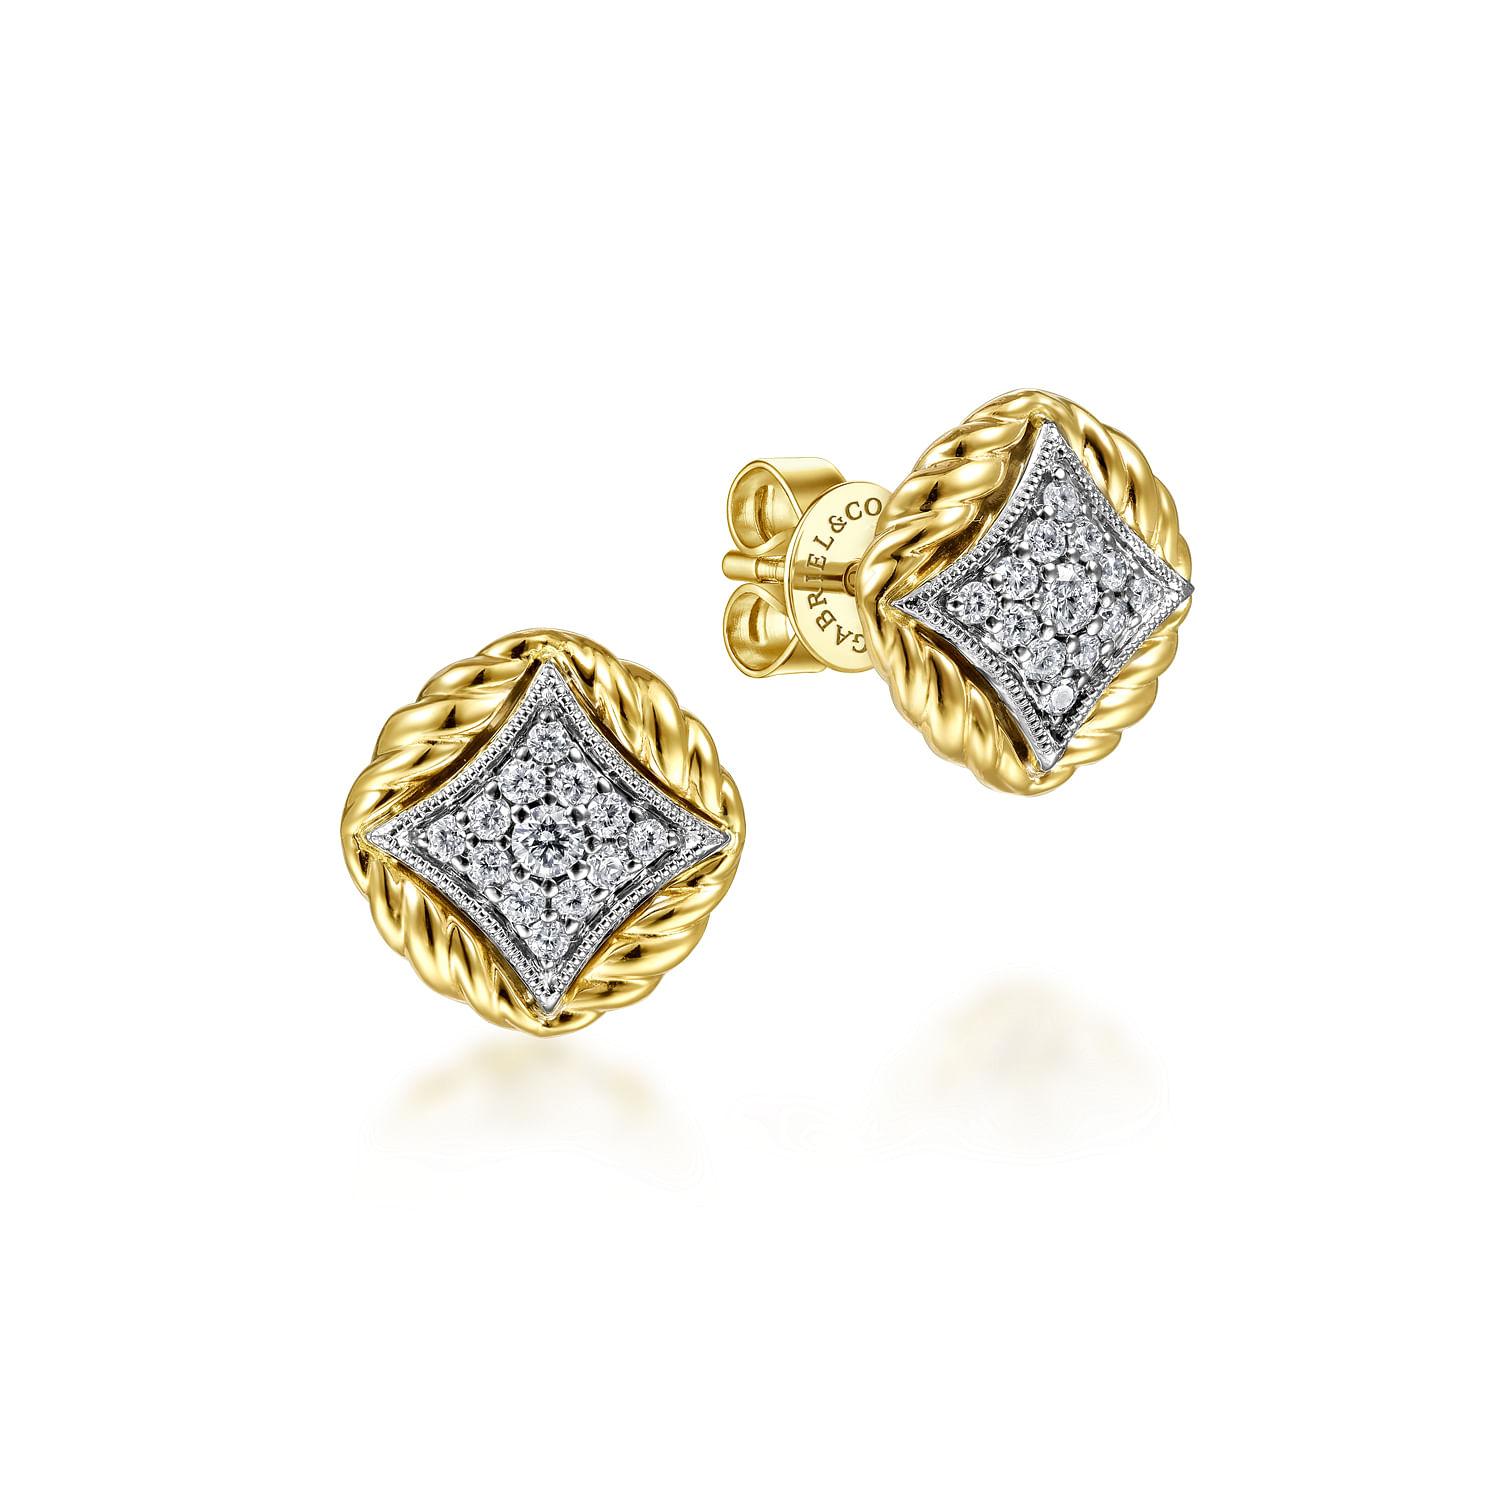 Gabriel - 14K Yellow-White Gold Pavé Diamond Stud Earrings with Twisted Rope